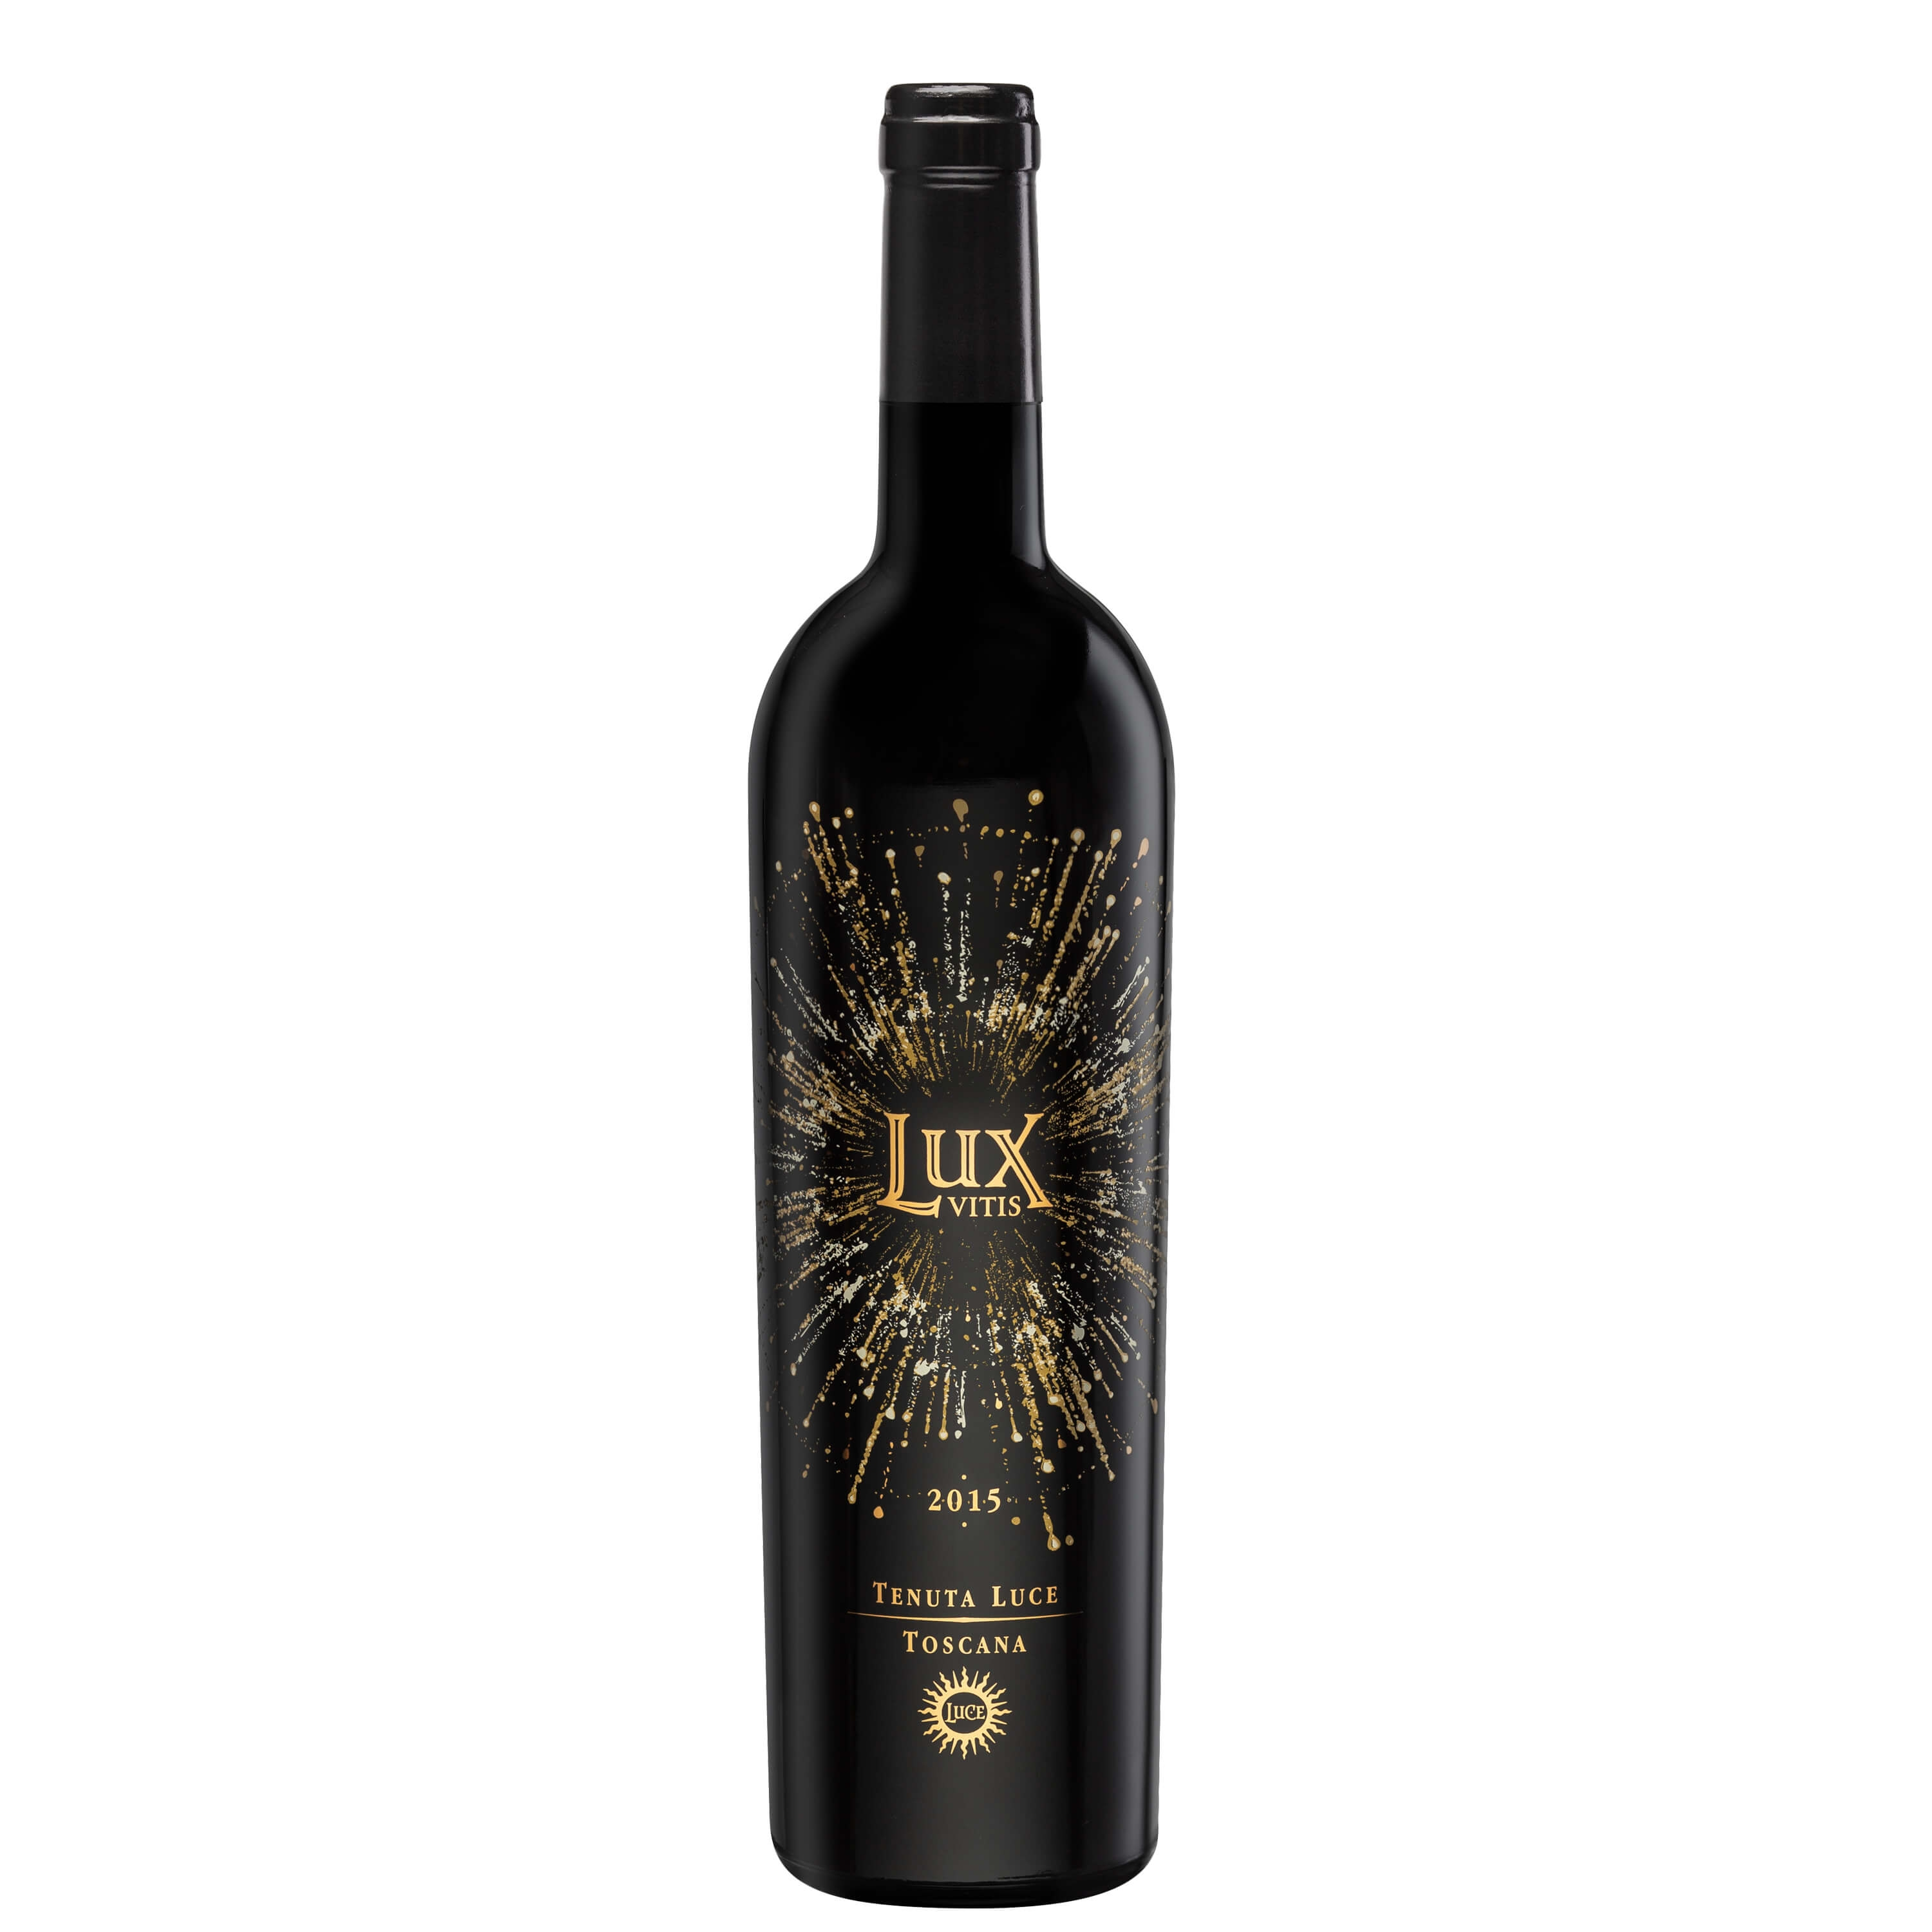 Toscana Rosso Igt Lux Vitis 2015 116729 IT Tannico